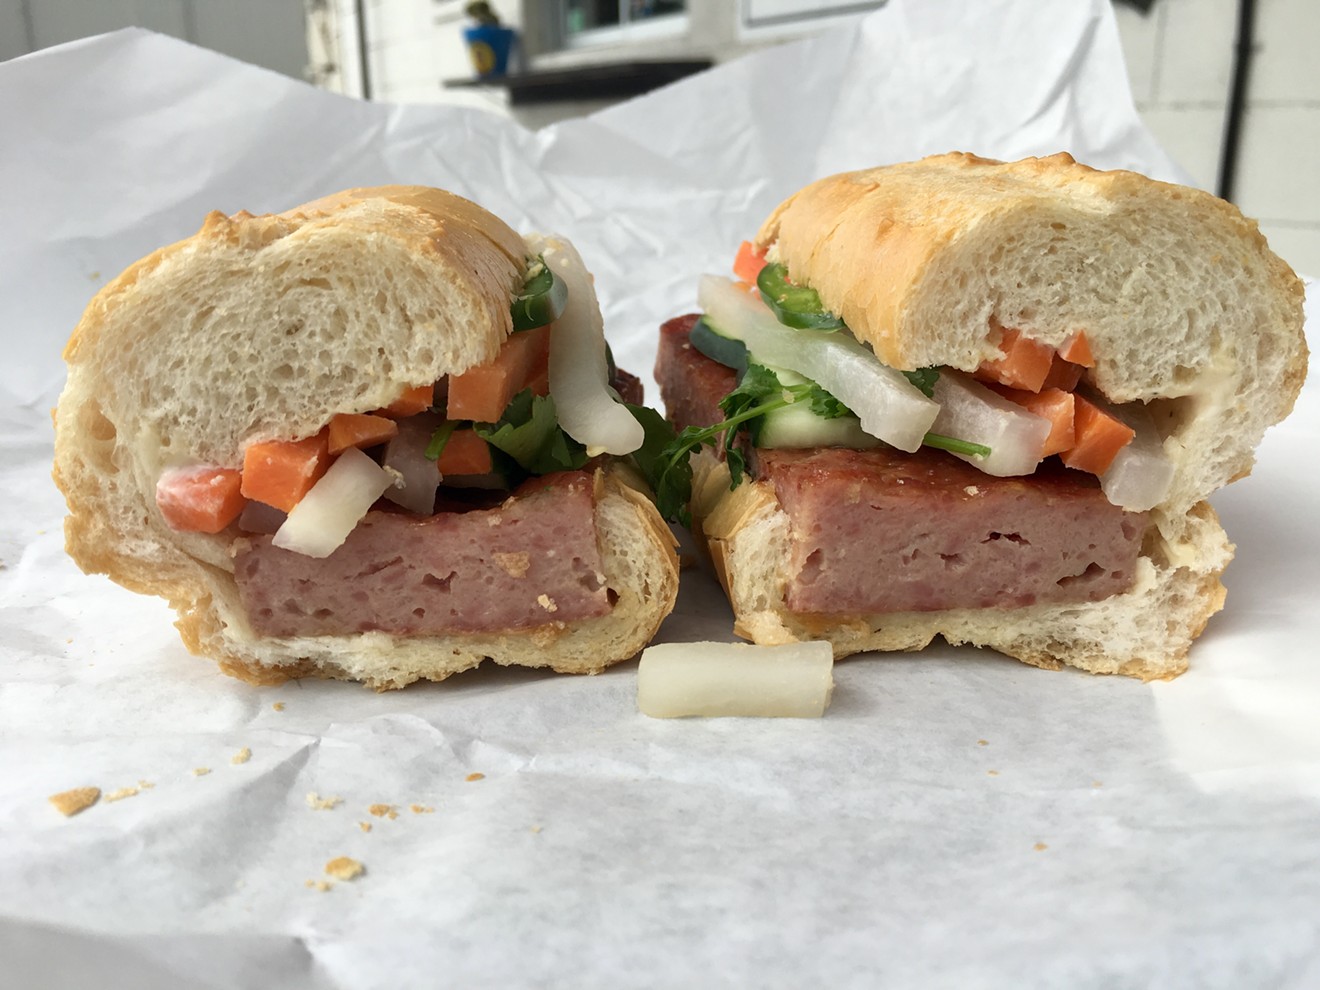 The garlicky pork banh mi features a sausage patty that's ground in house for $9.